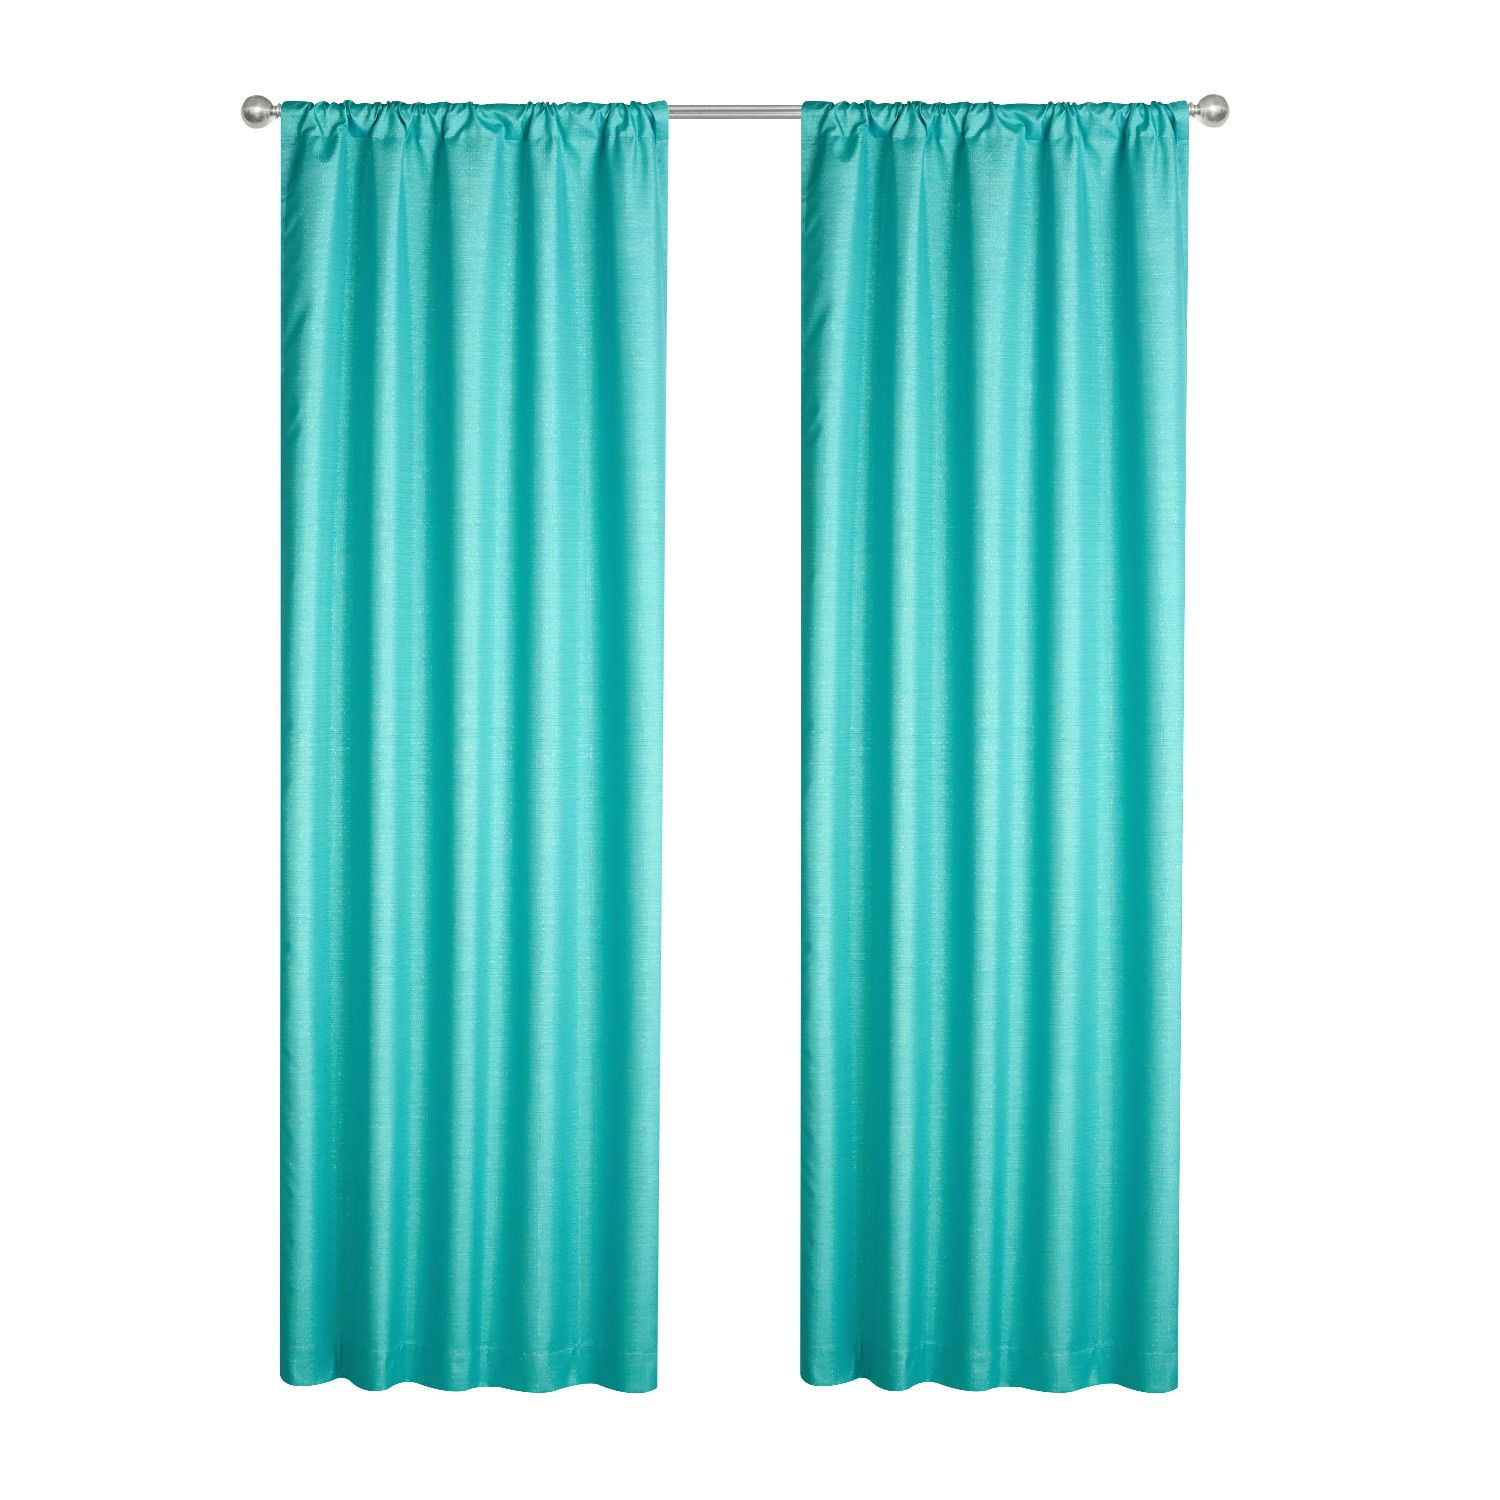 Your Zone Kids Solid Sparkle Room Darkening Curtains, Single Panel, 37 in W x 84 in L, Turquoise